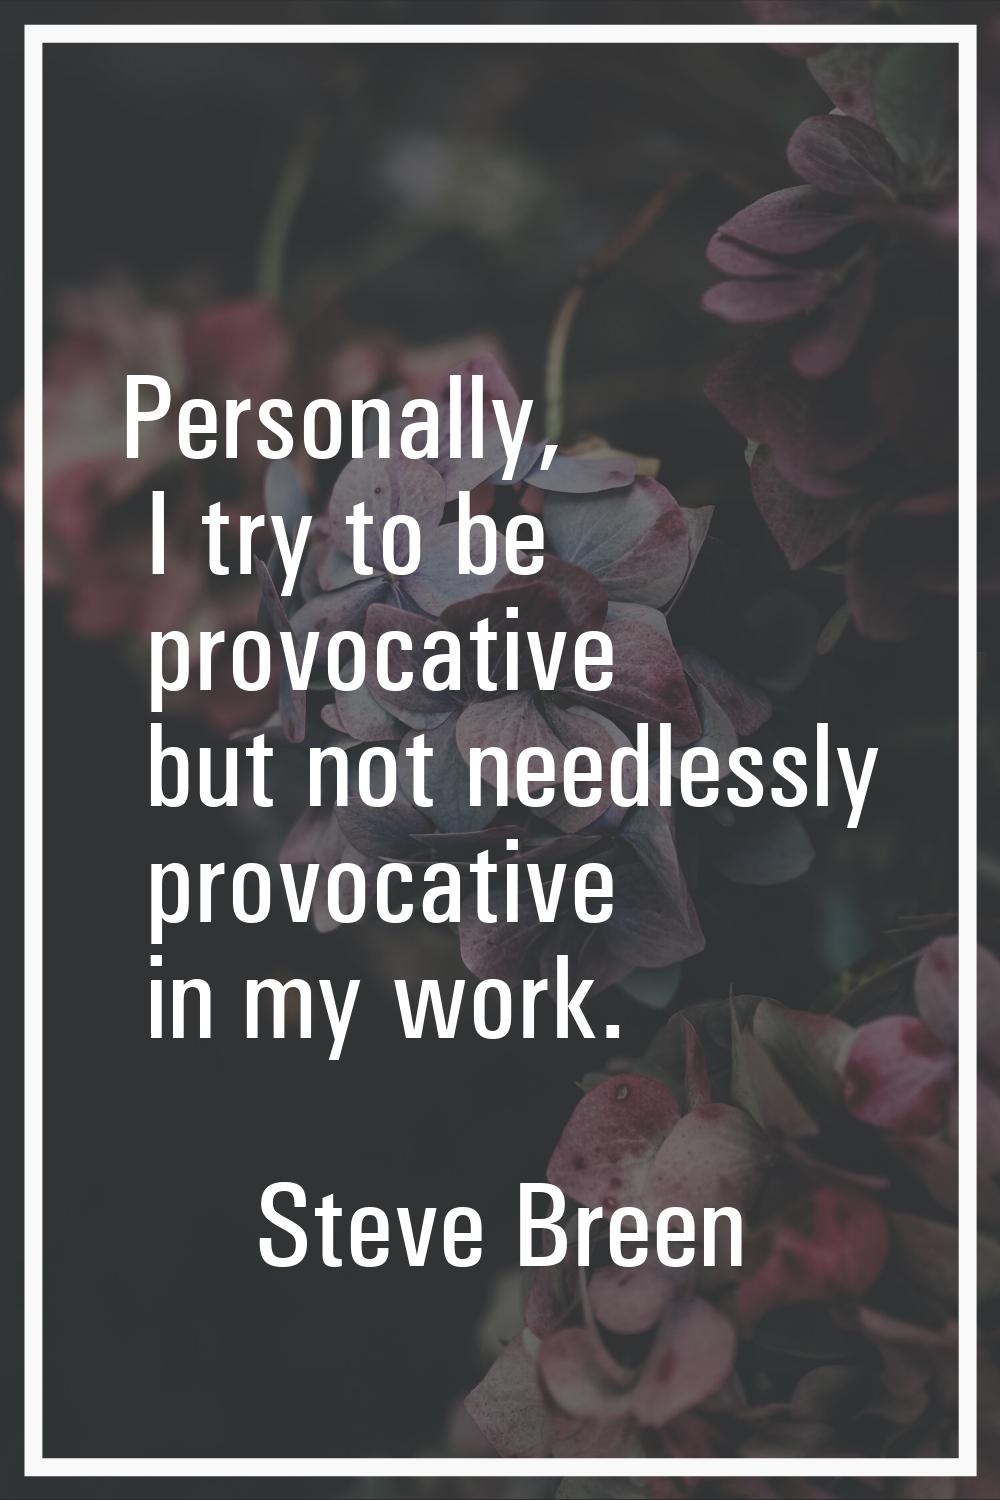 Personally, I try to be provocative but not needlessly provocative in my work.